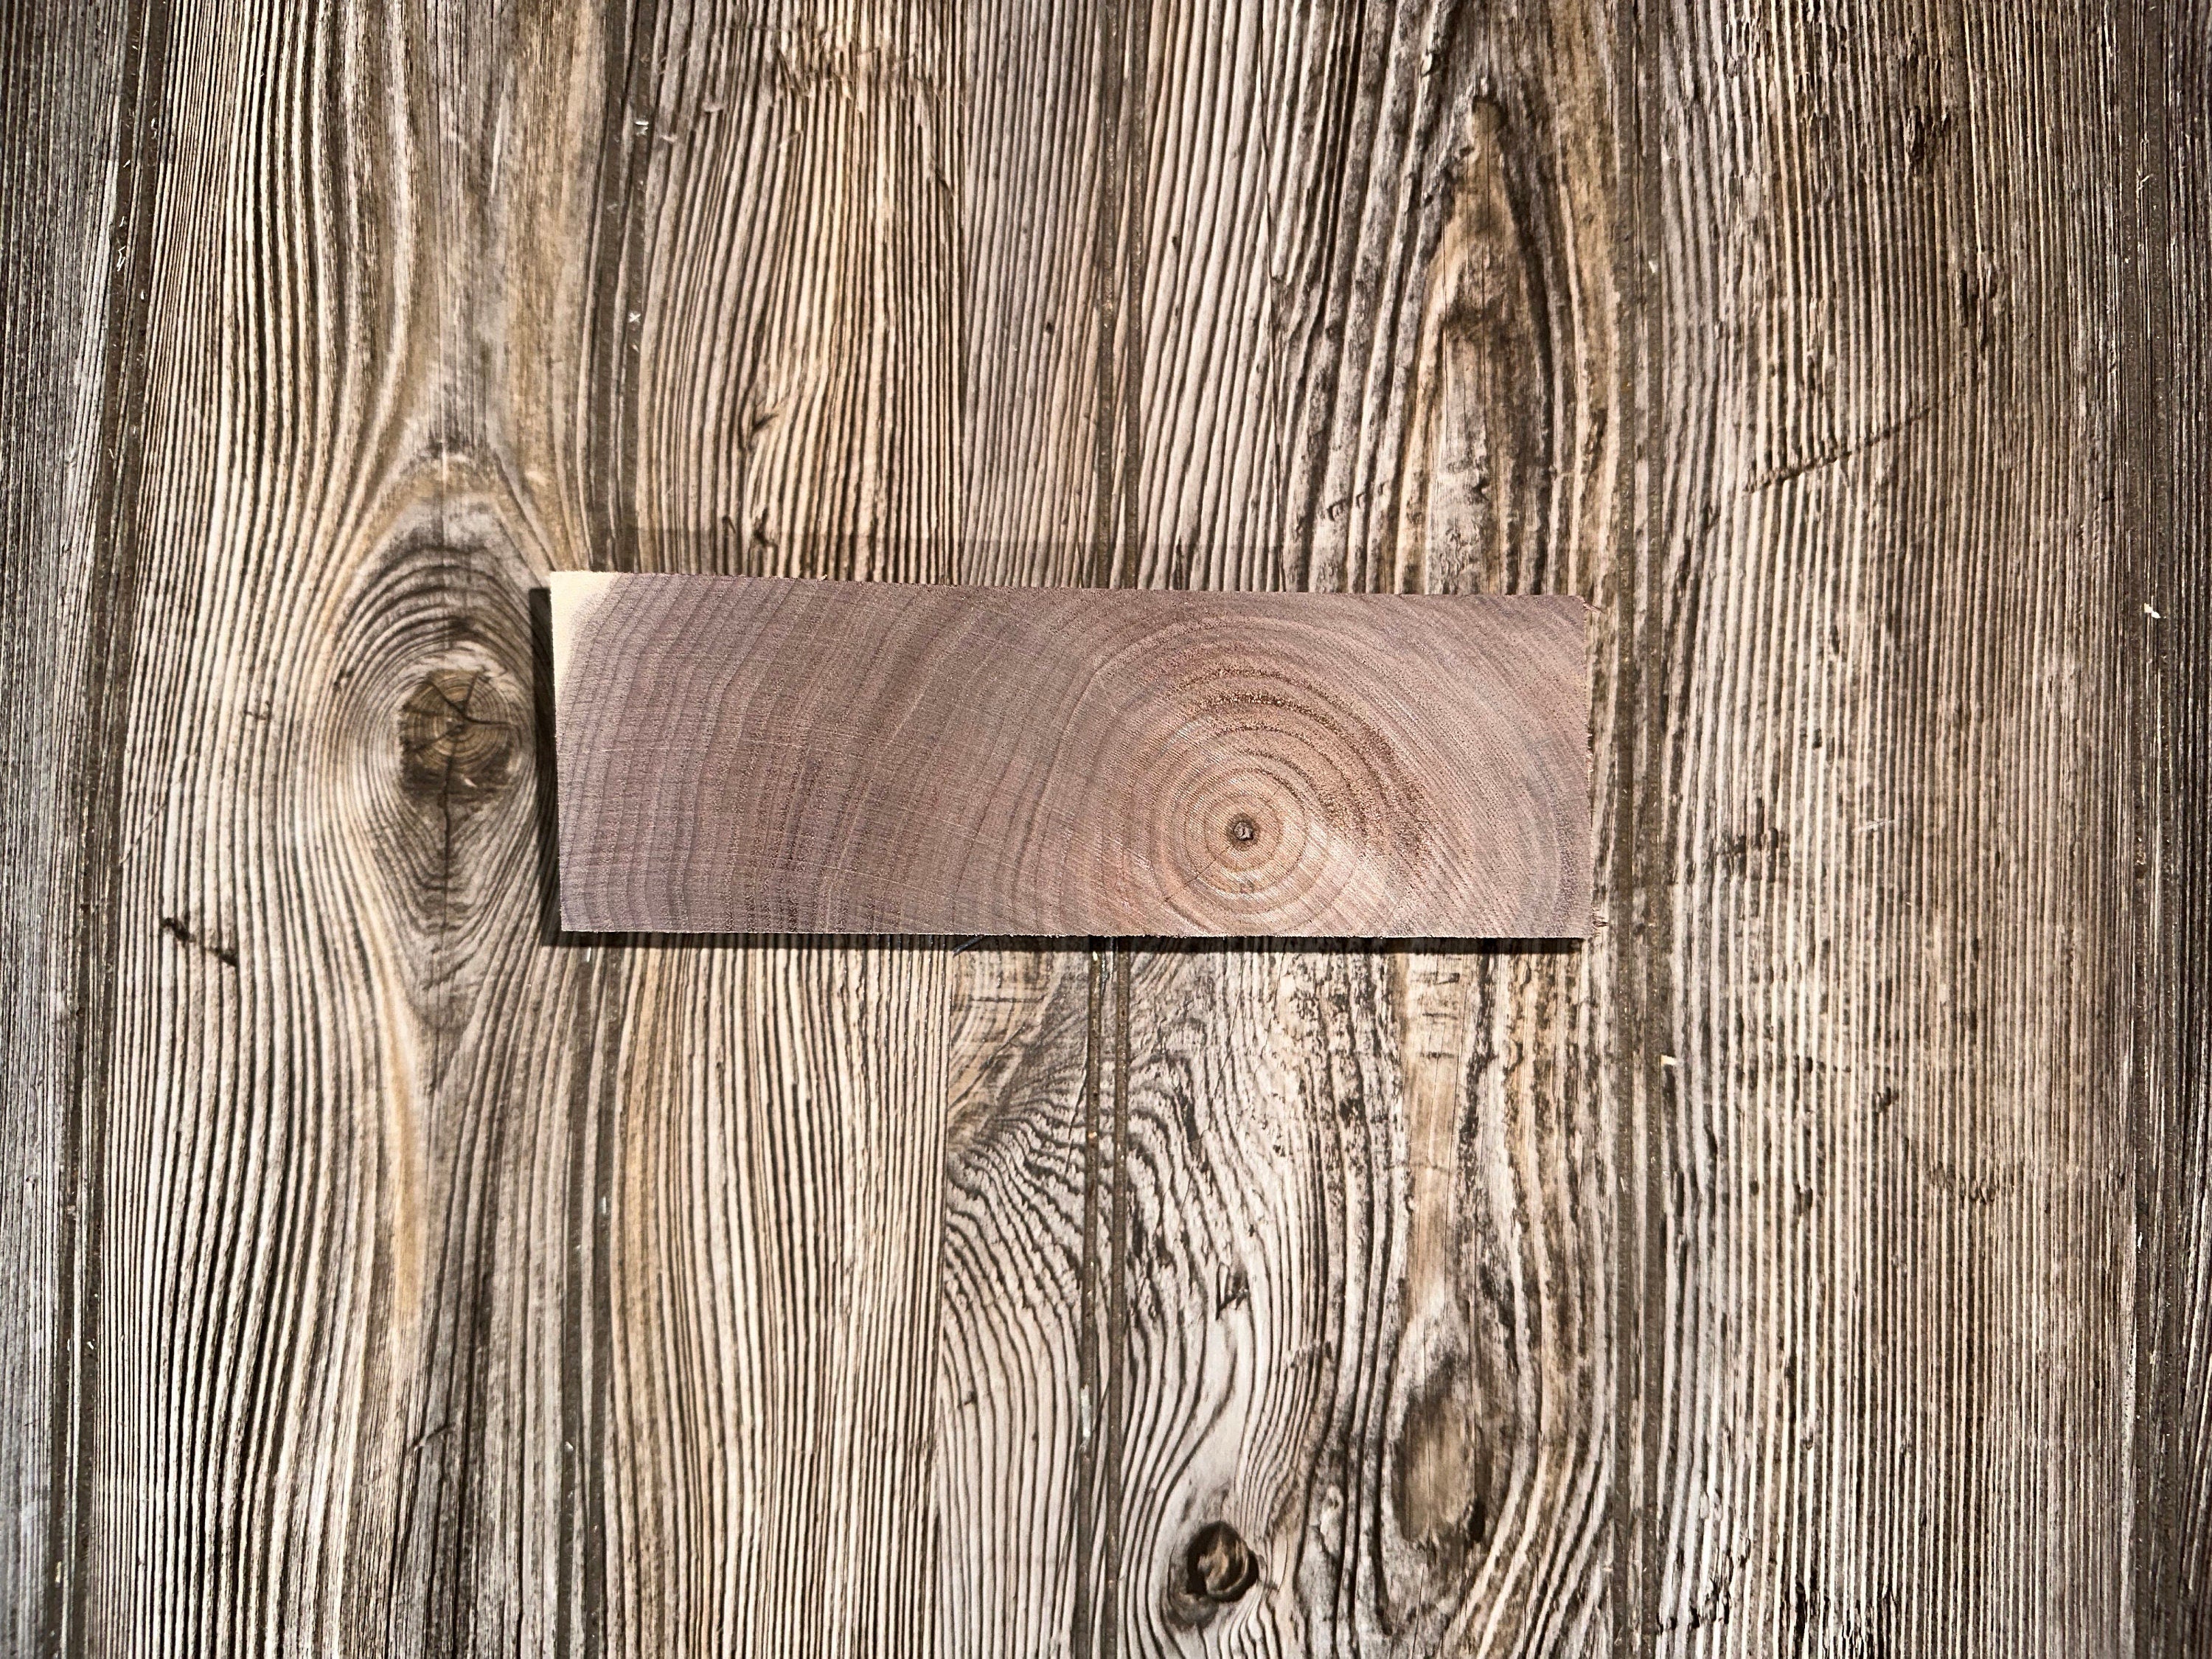 Black Walnut Slab, Approximately 7 Inches Long by 2 Inches Wide by 2 Inches High